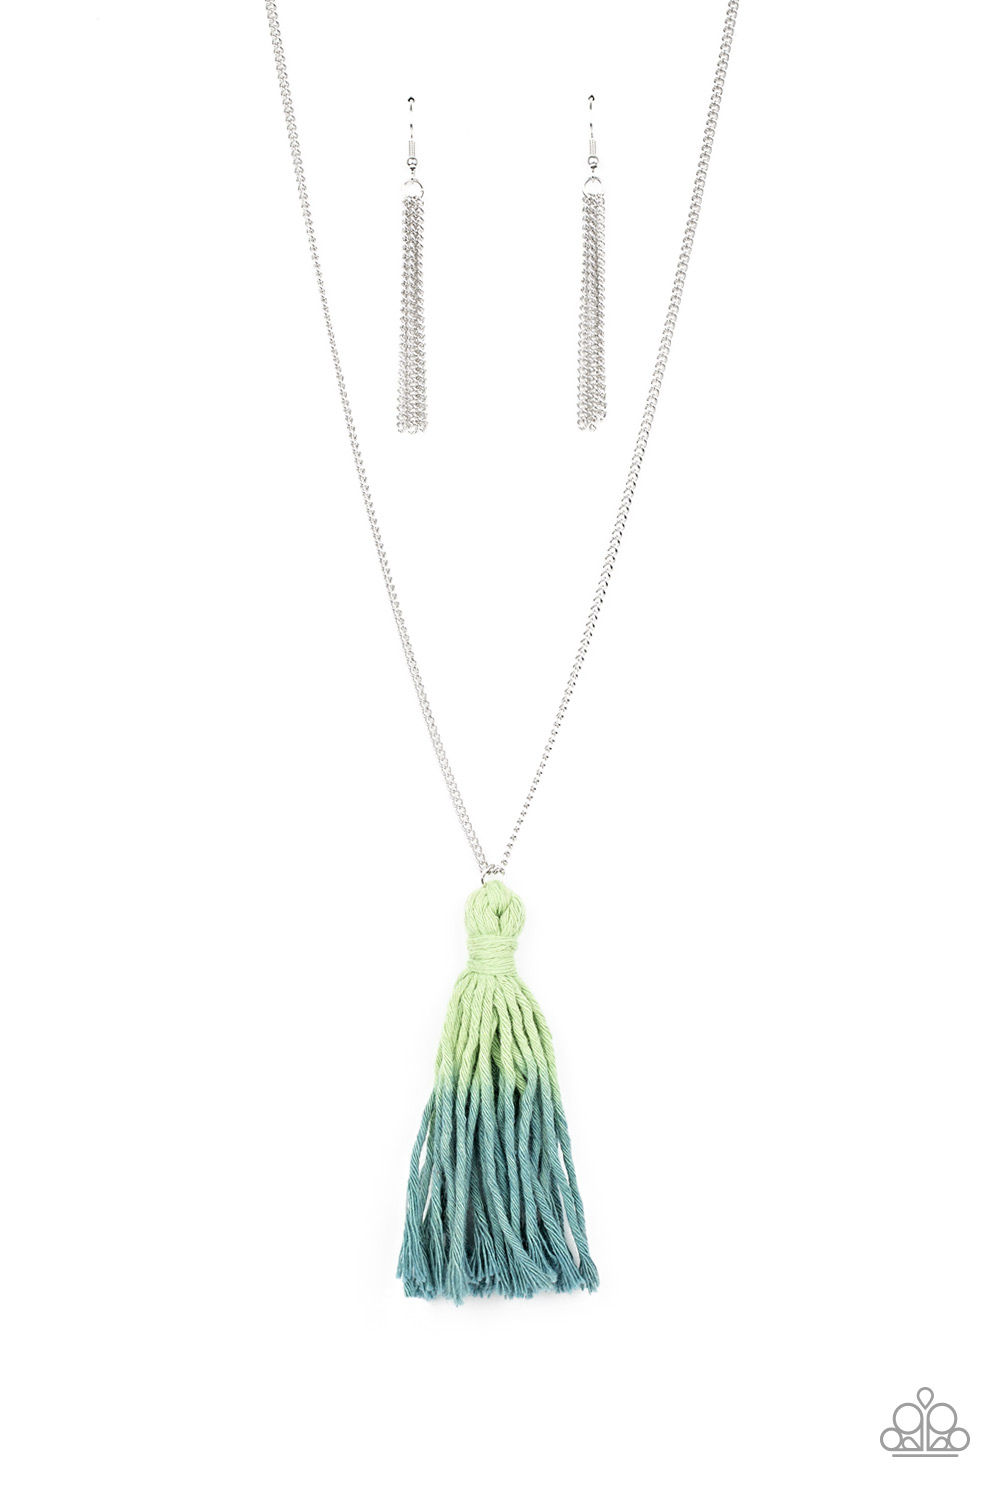 Necklace - Totally Tasseled - Green